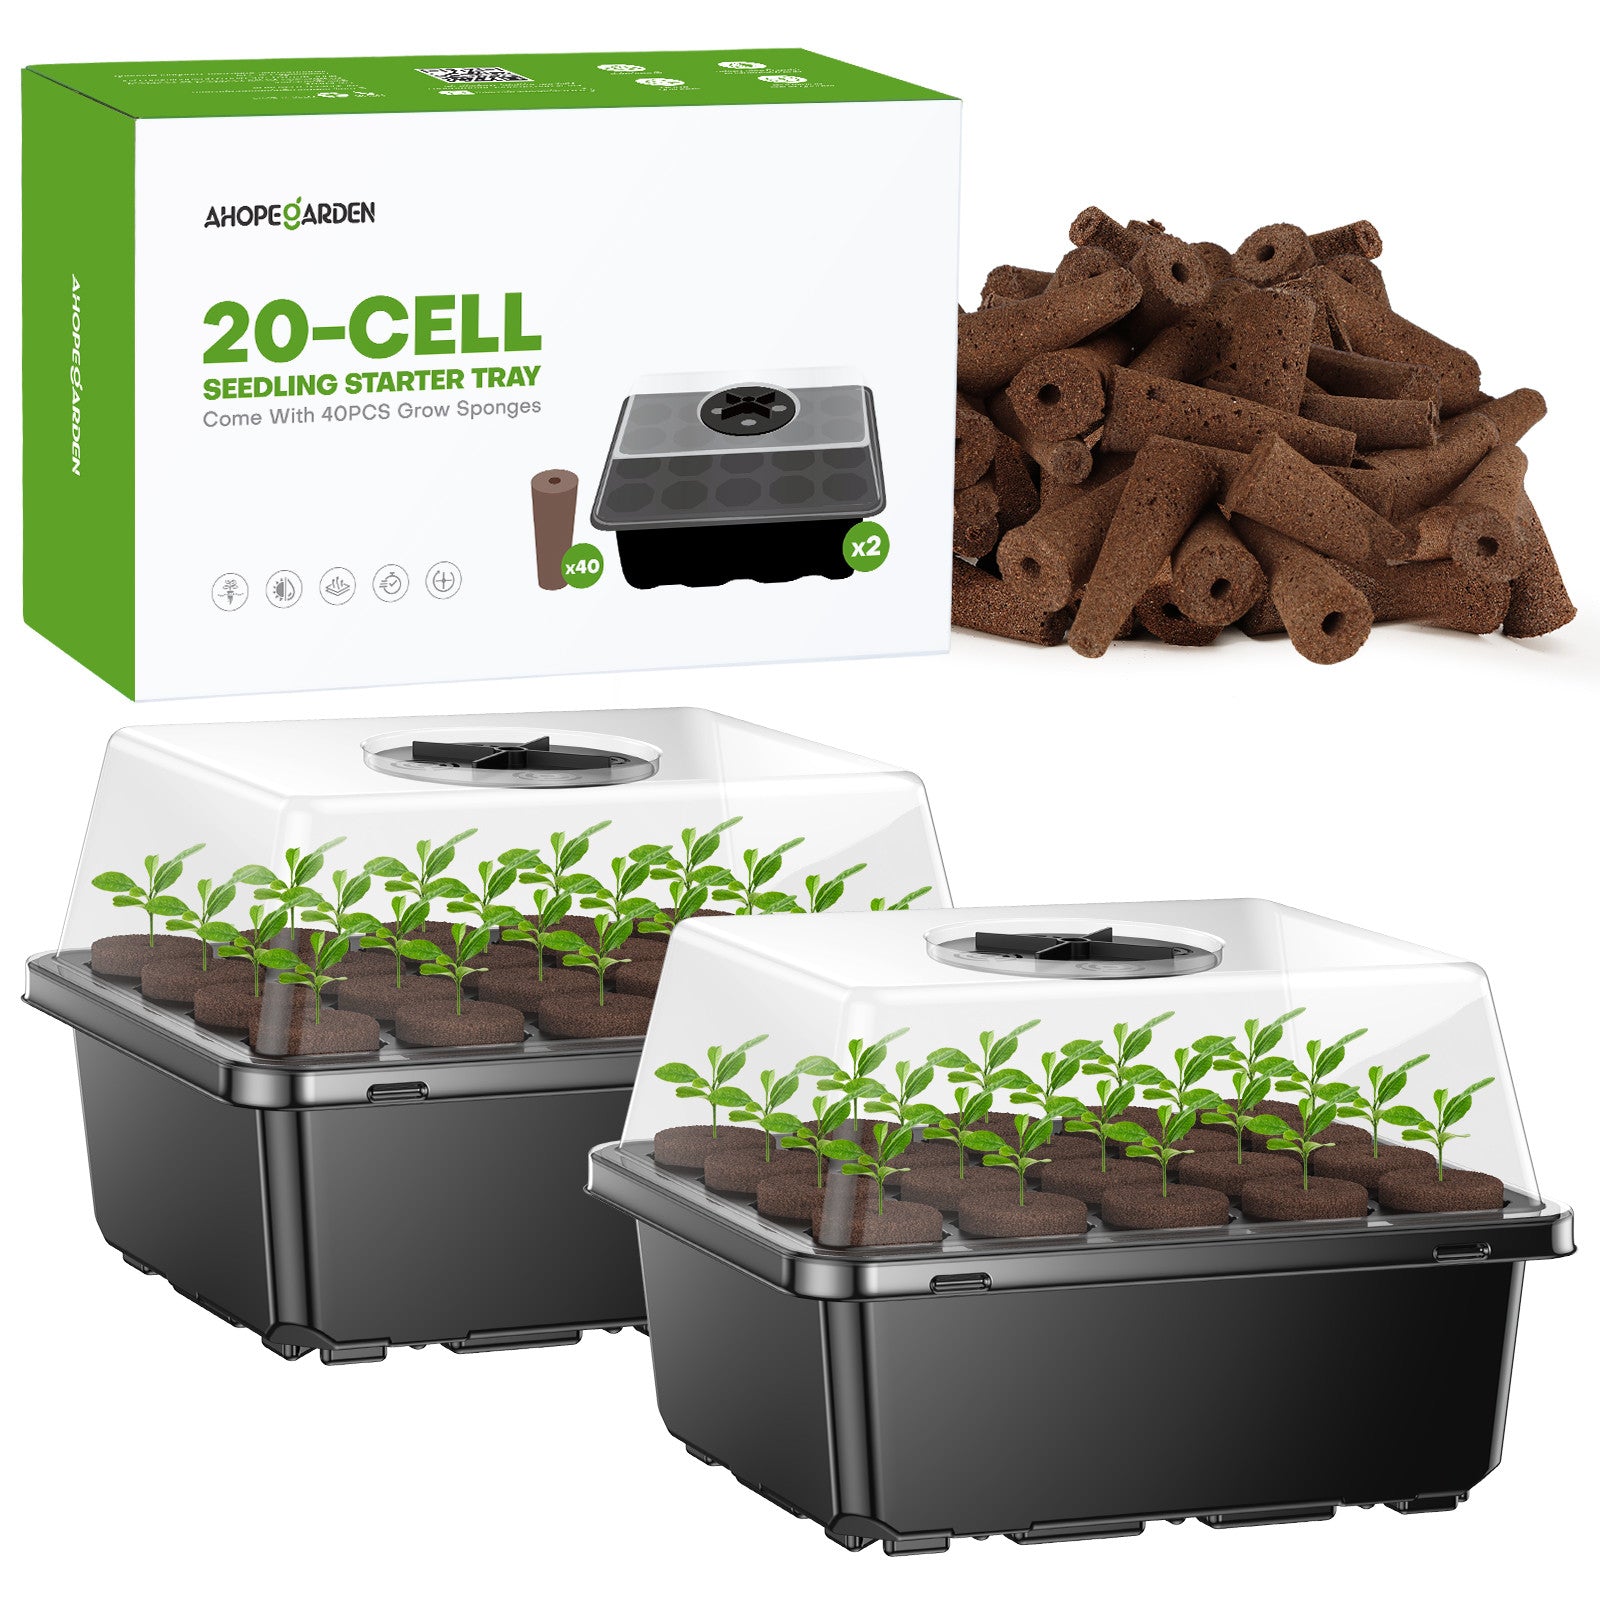 Ahope 40-Cell Seed Starting Trays: Packaging and Seed Growth